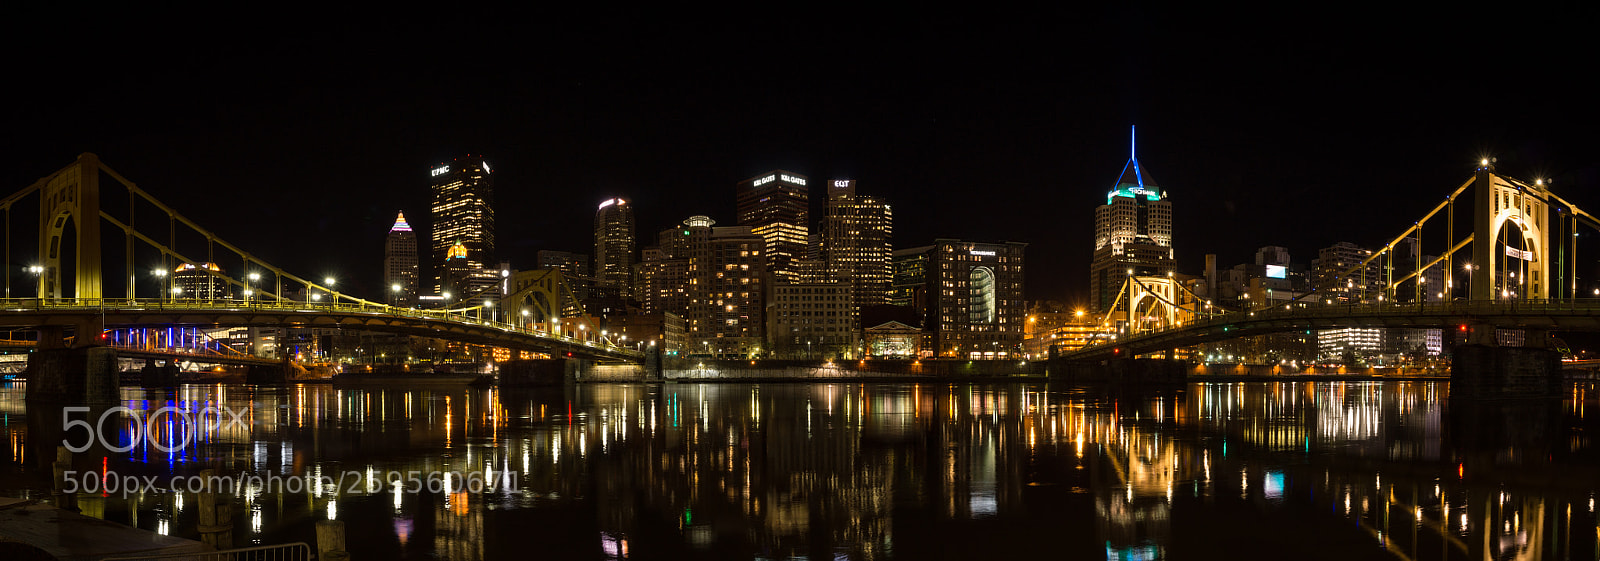 Sony a6000 sample photo. The pittsburgh cityscape at photography